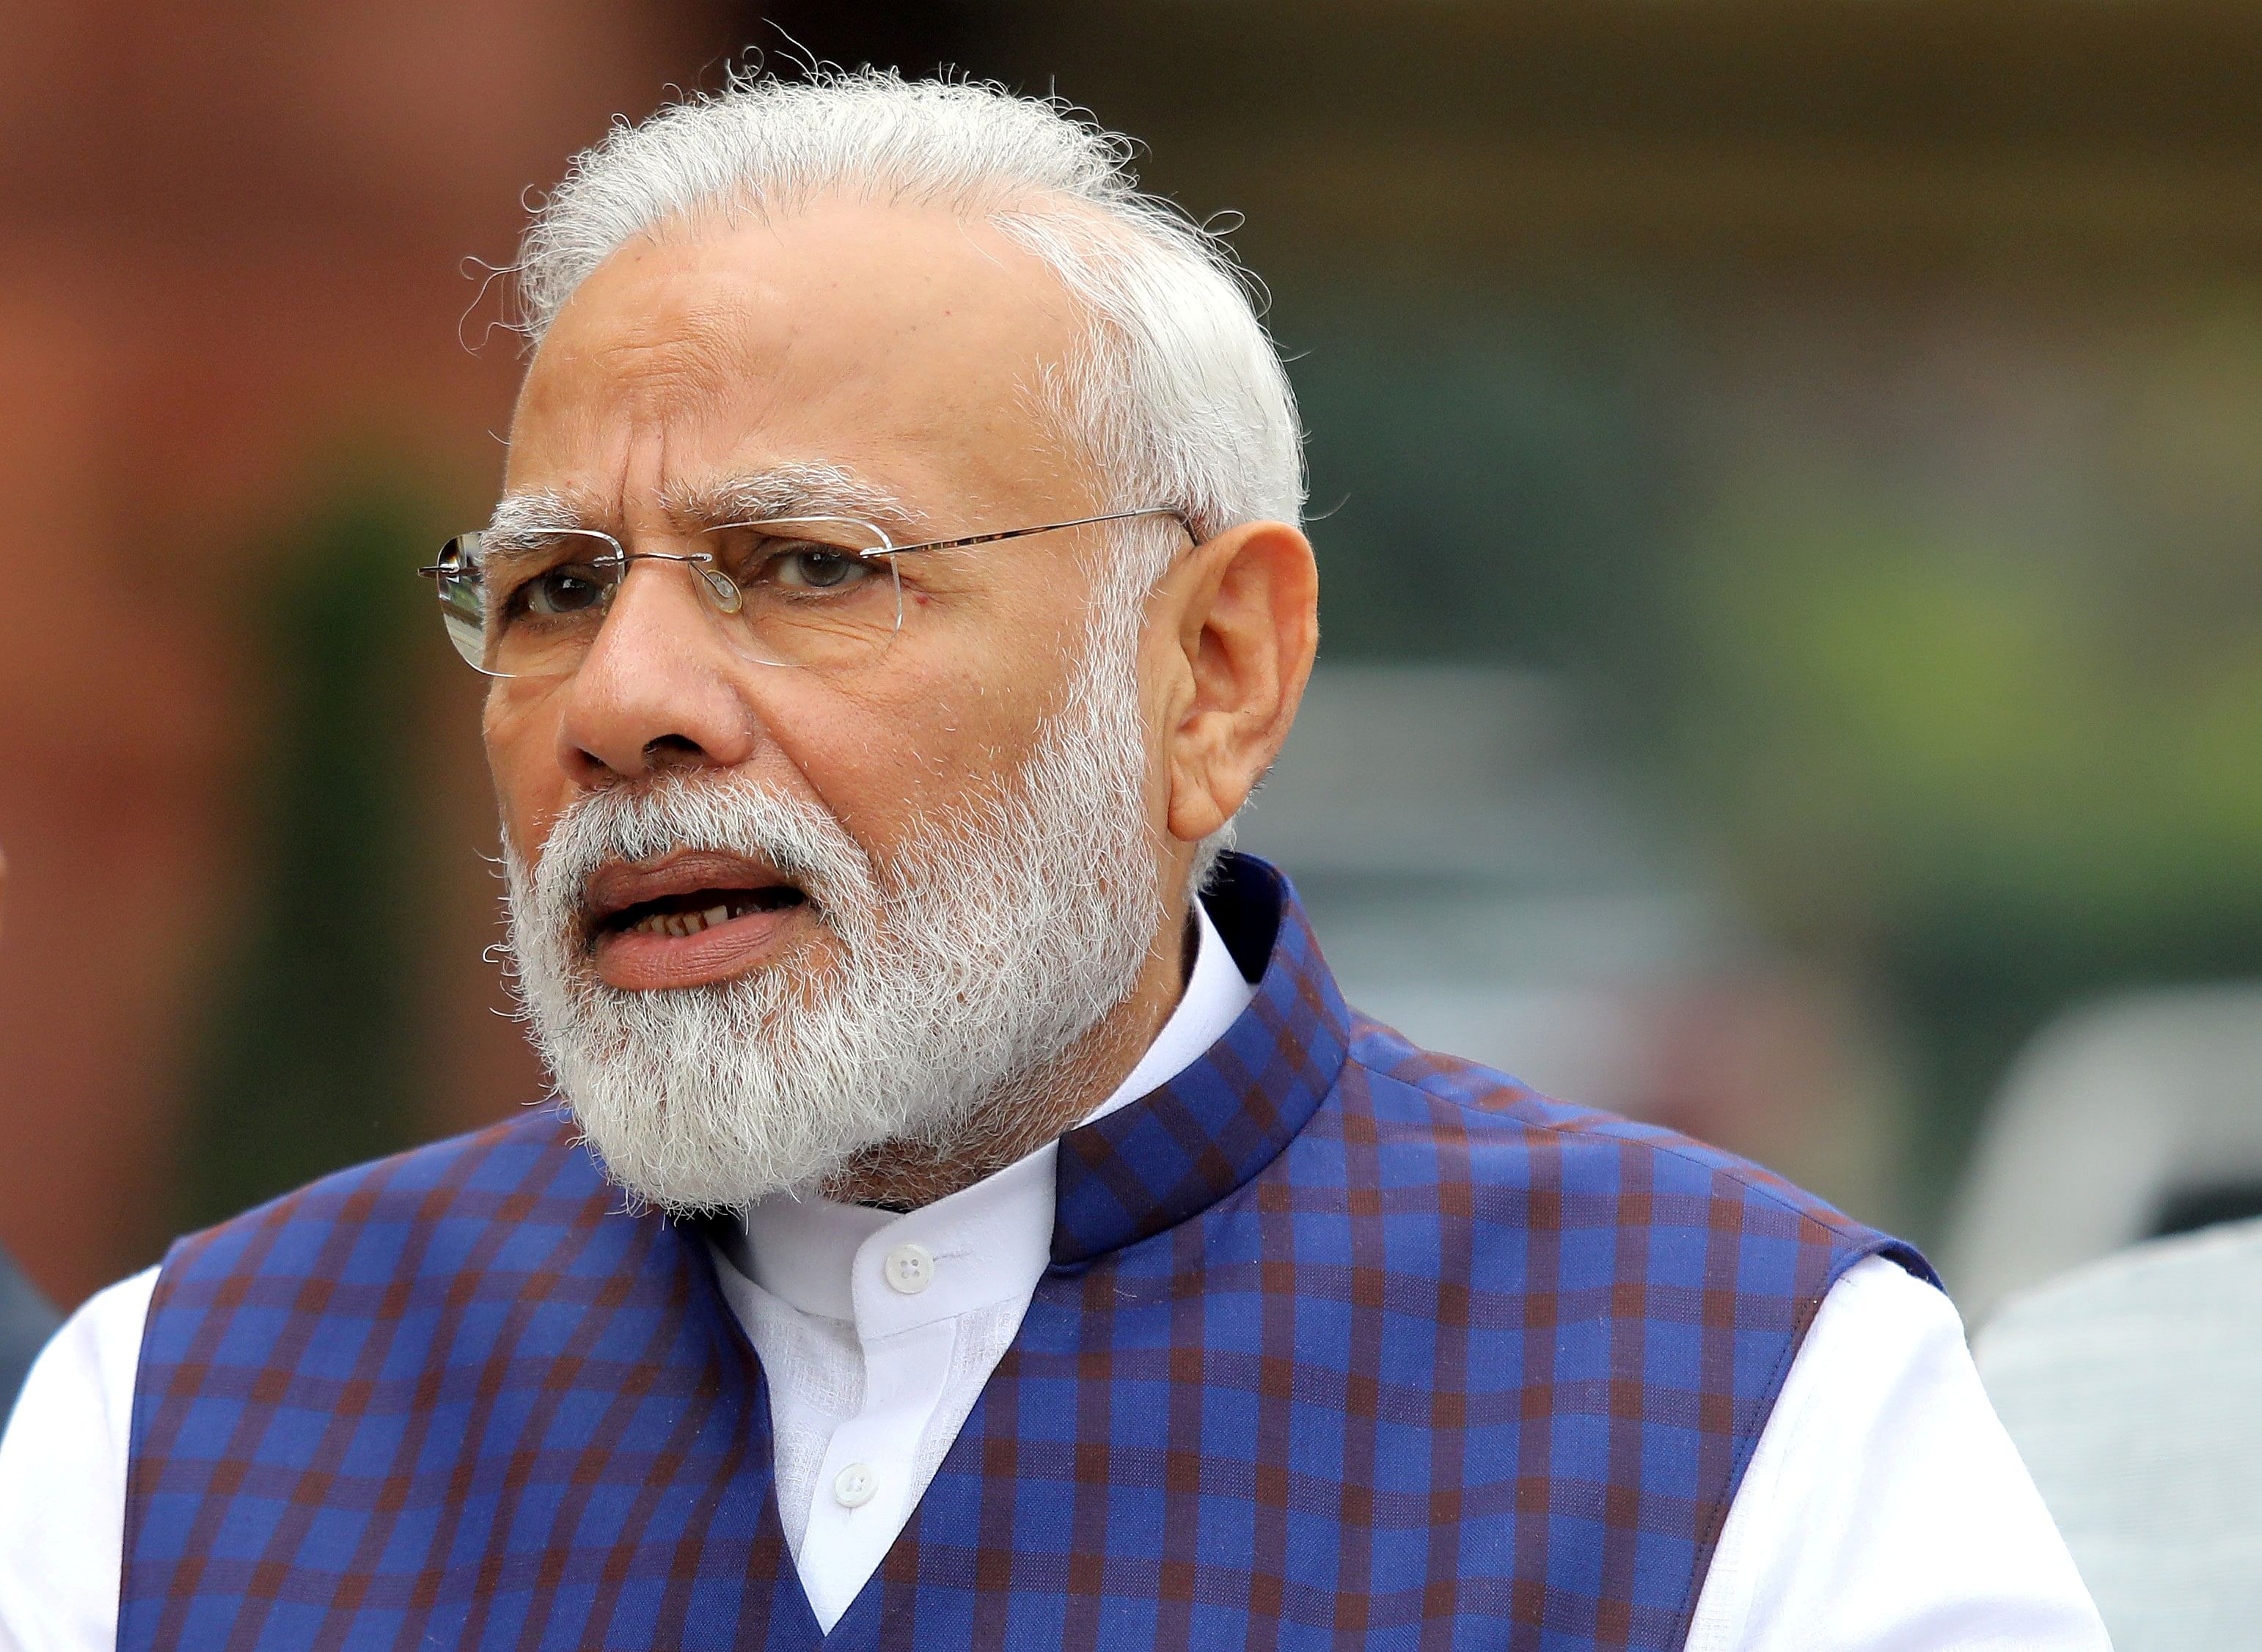 Modi first announced curbs on non-essential imports in 2018 to rein in the current account deficit and halt a rout in the rupee at a time when investors were dumping emerging-market assets. (Credit: Reuters Photo)